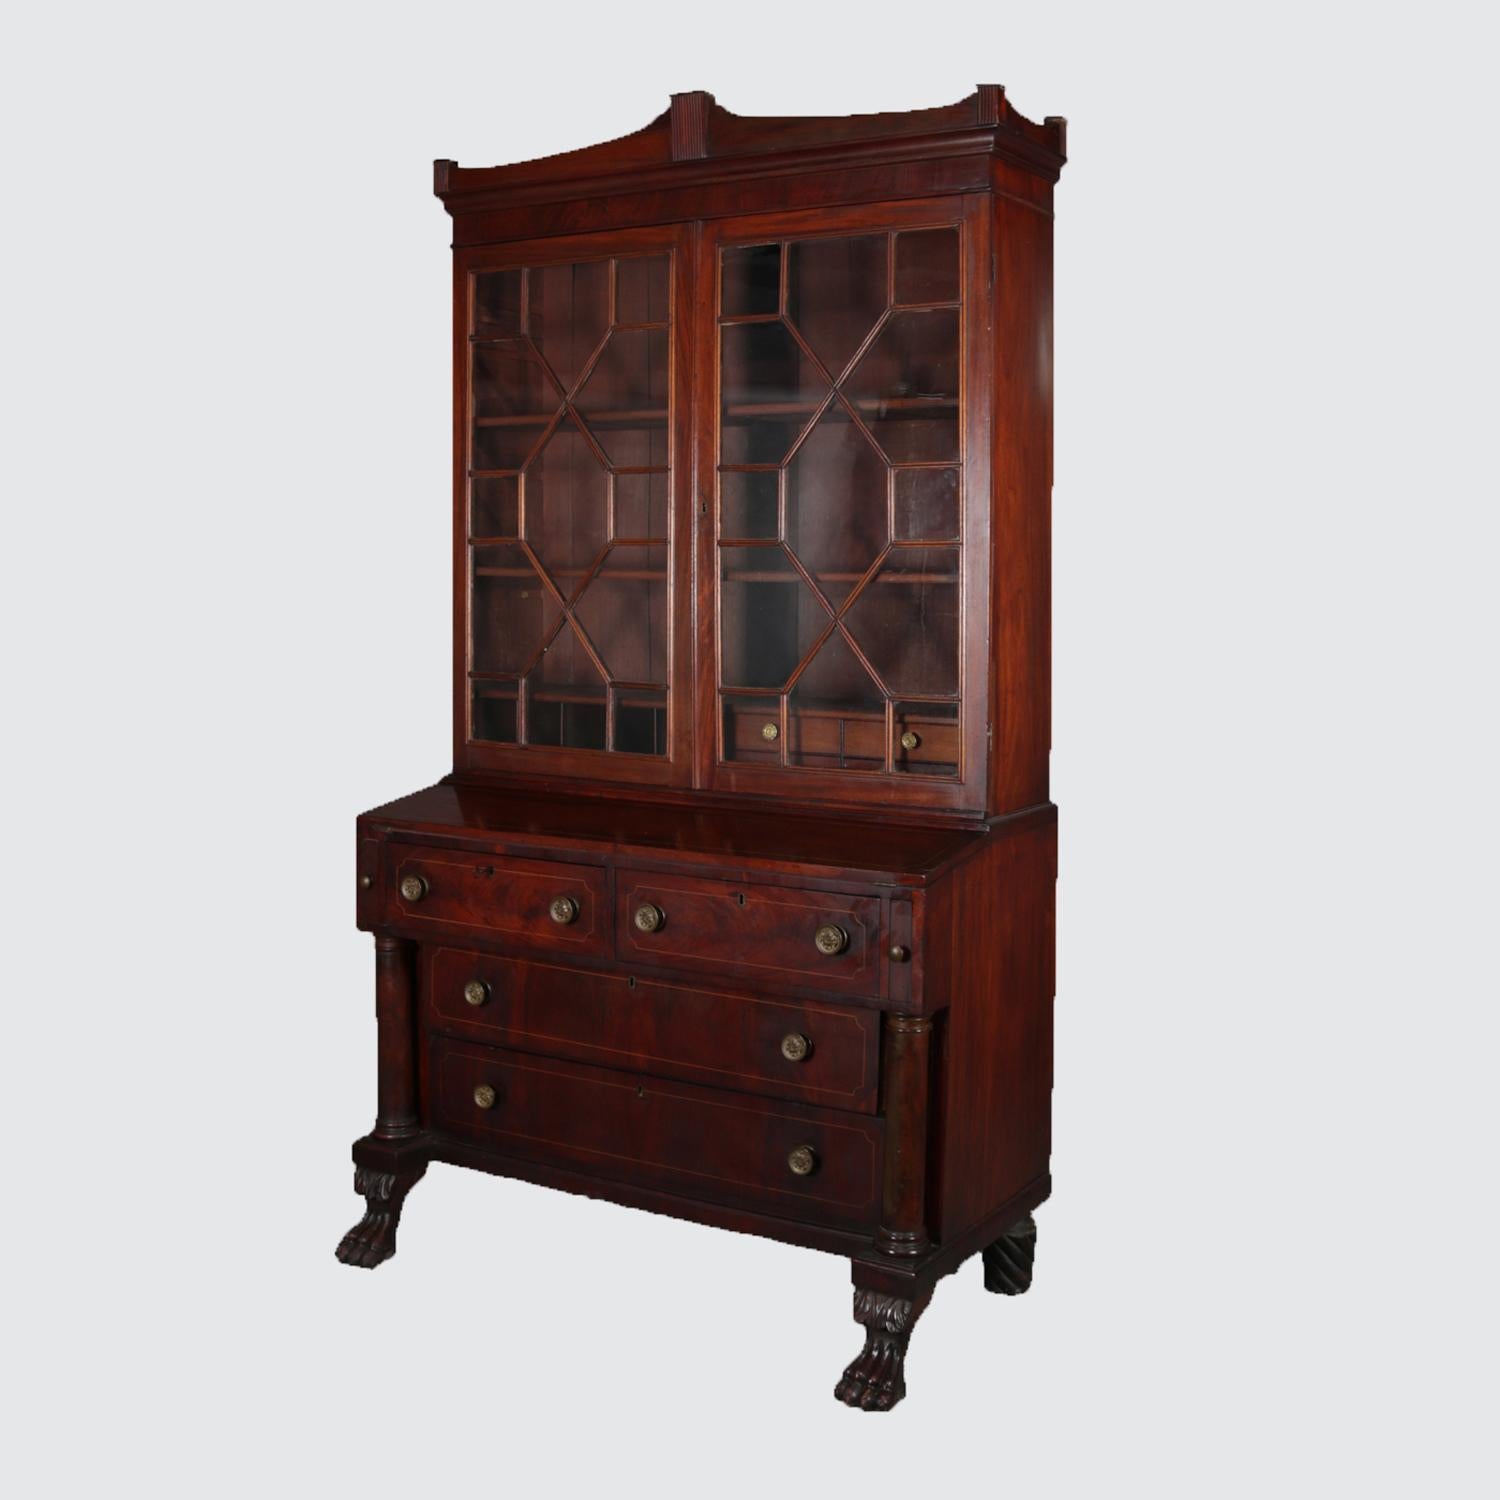 An American Empire flame mahogany secretary features upper bookcase with double fretwork glass doors opening to adjustable shelf interior with drawers and pigeon holes surmounting case having drop front writing above two frieze drawers over two long